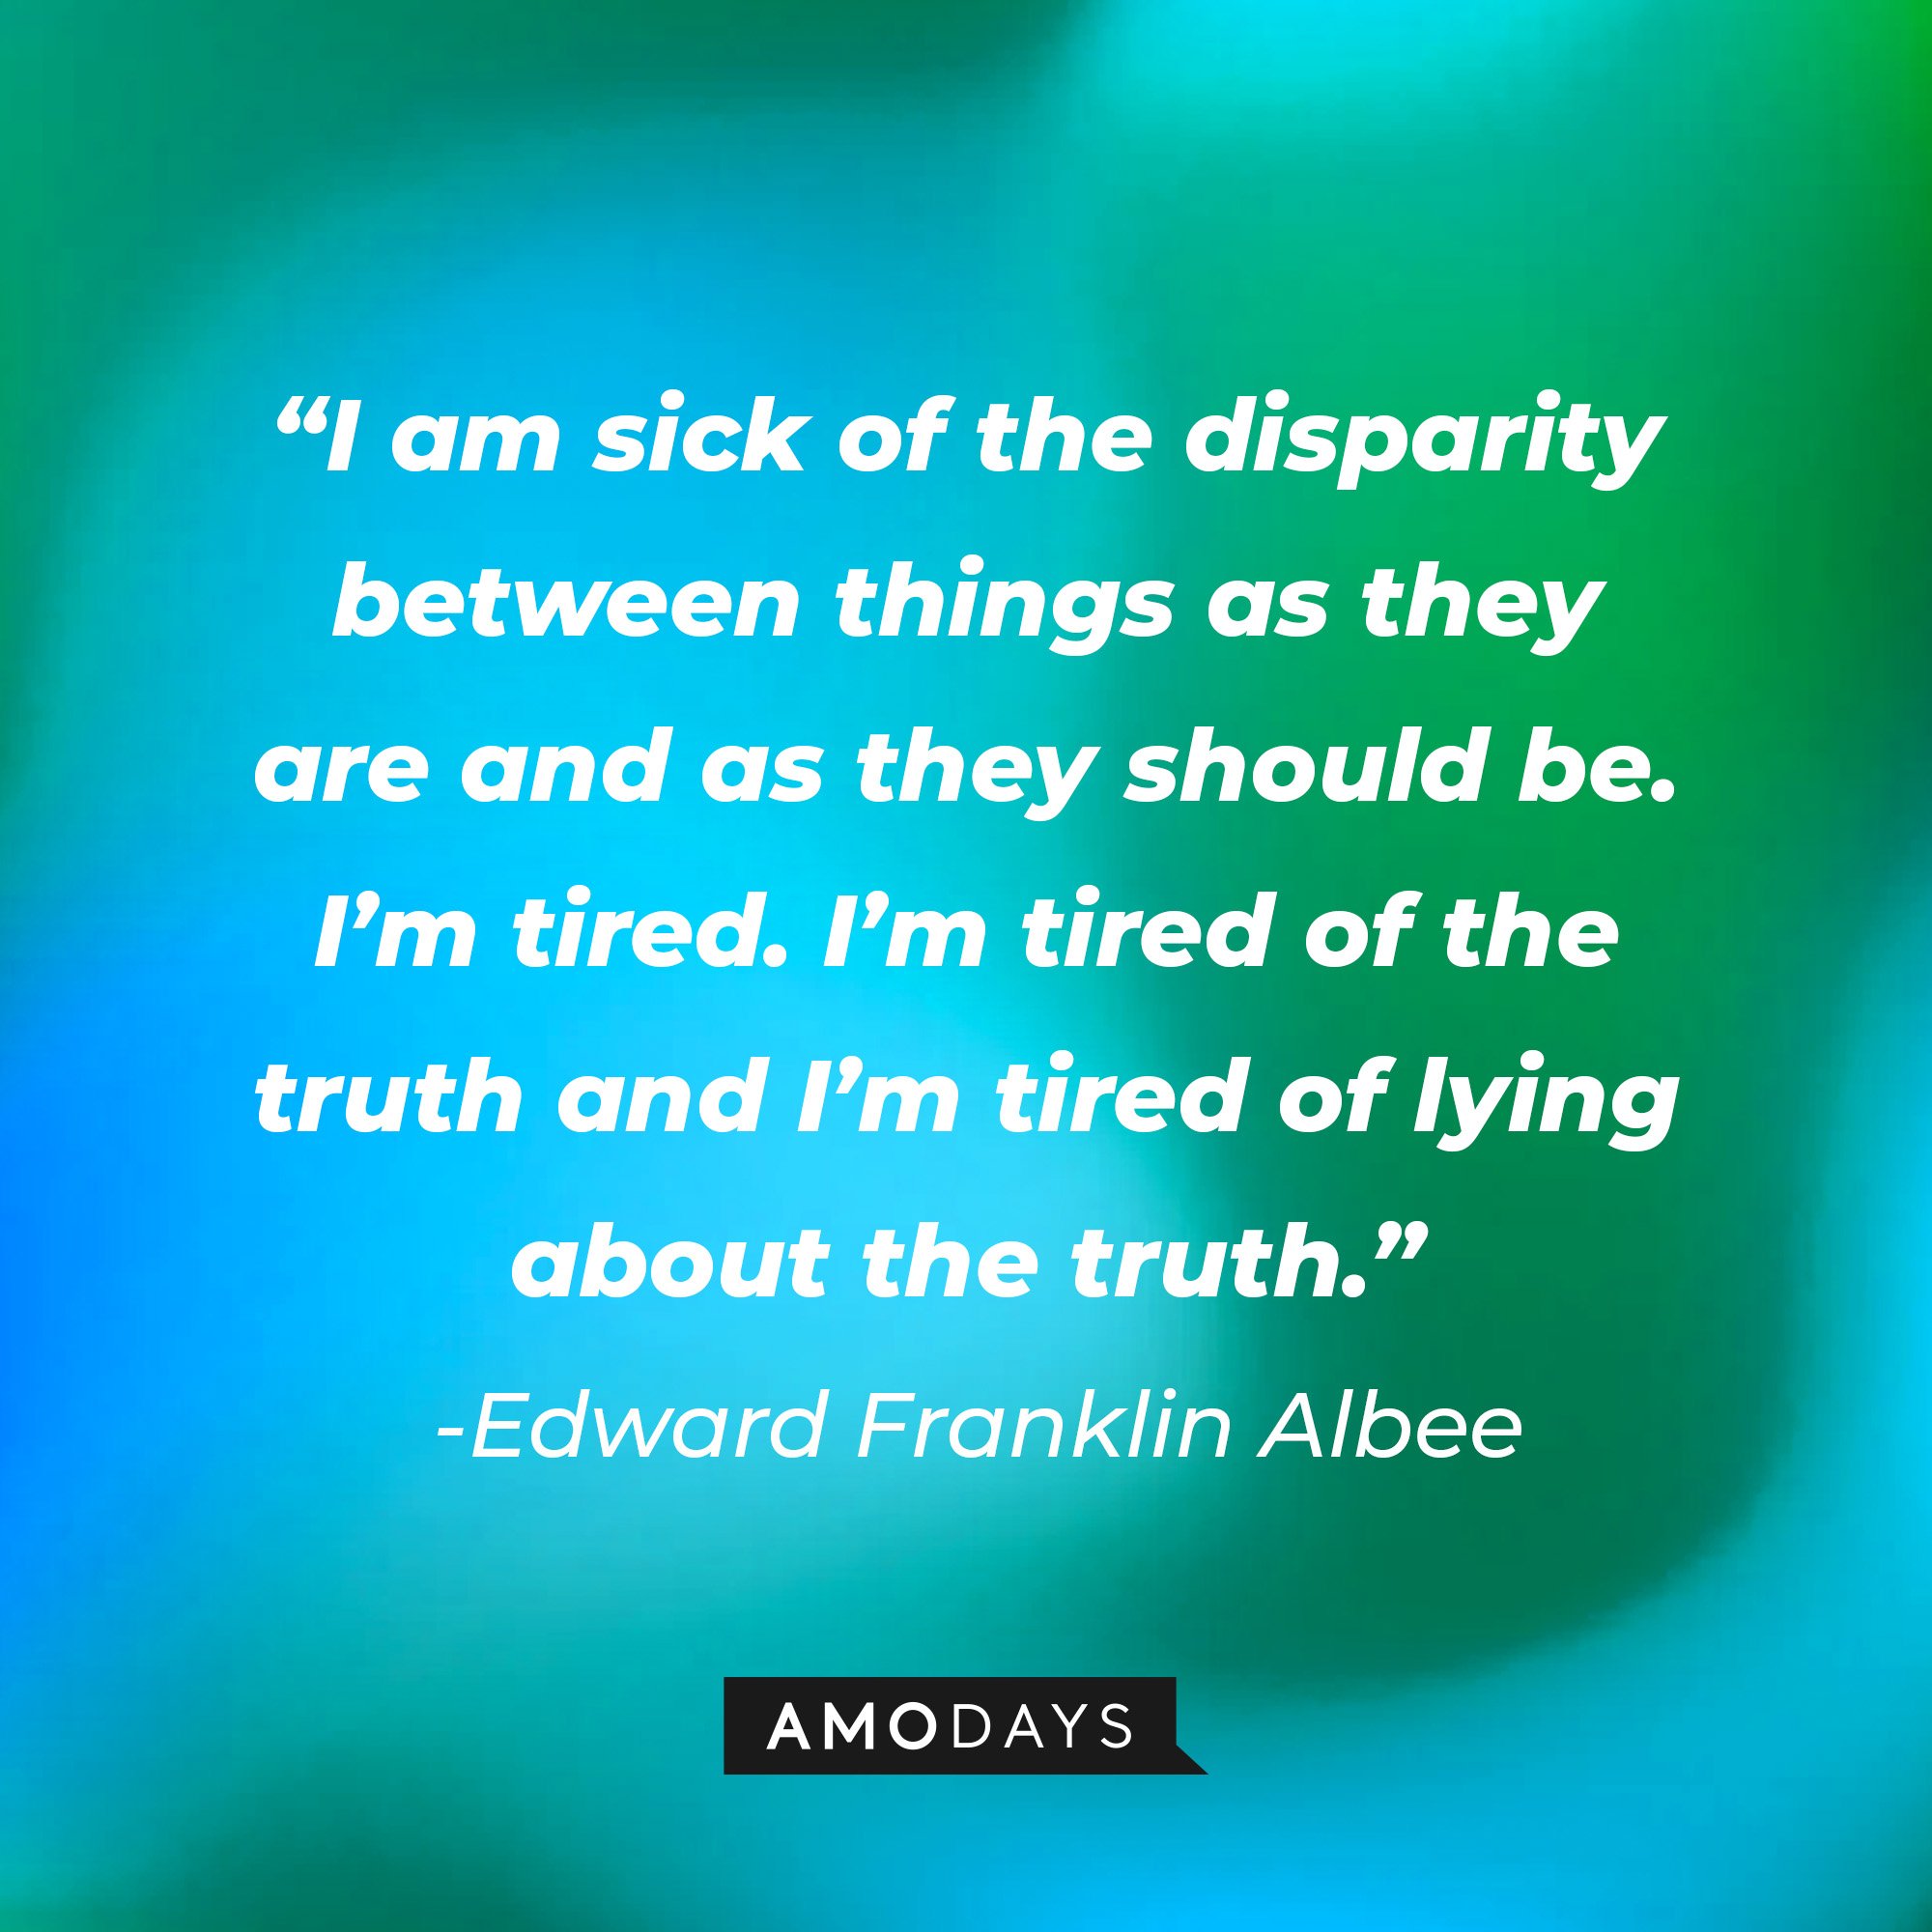  Edward Franklin Albee's quote: “I am sick of the disparity between things as they are and as they should be. I’m tired. I’m tired of the truth and I’m tired of lying about the truth.” | Image: AmoDays